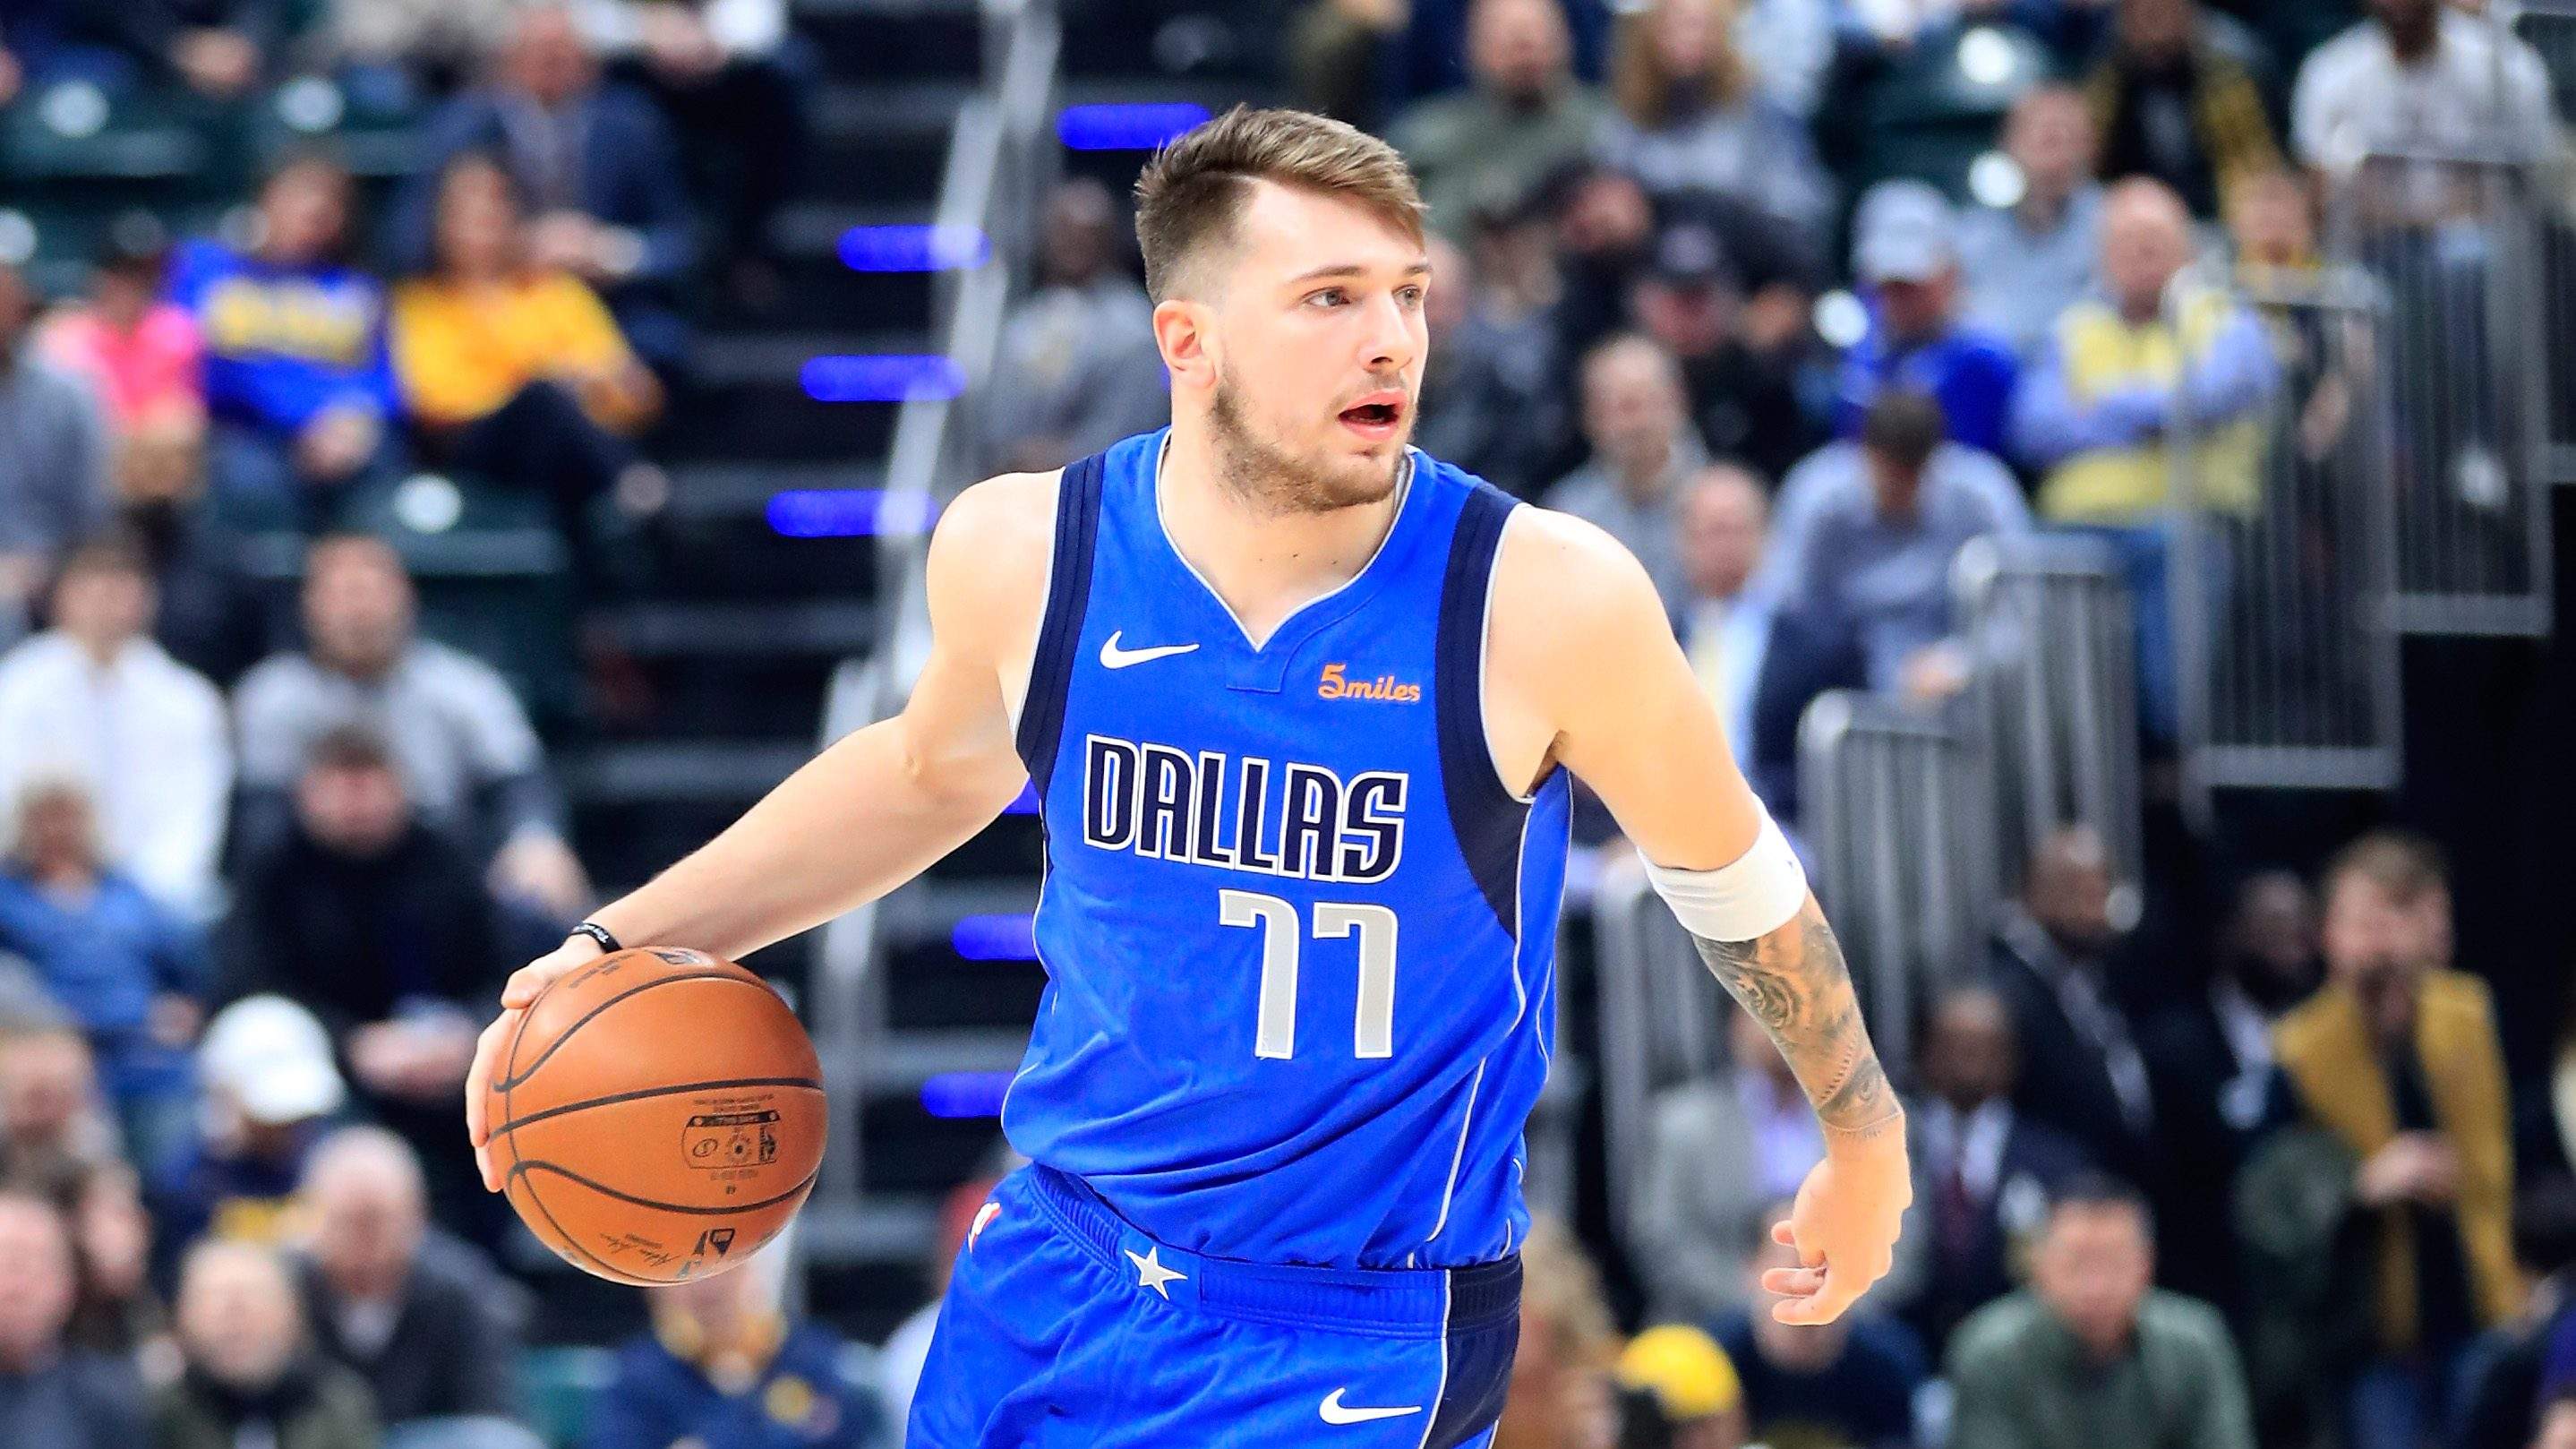 70 Luka Dončić HD Wallpapers and Backgrounds